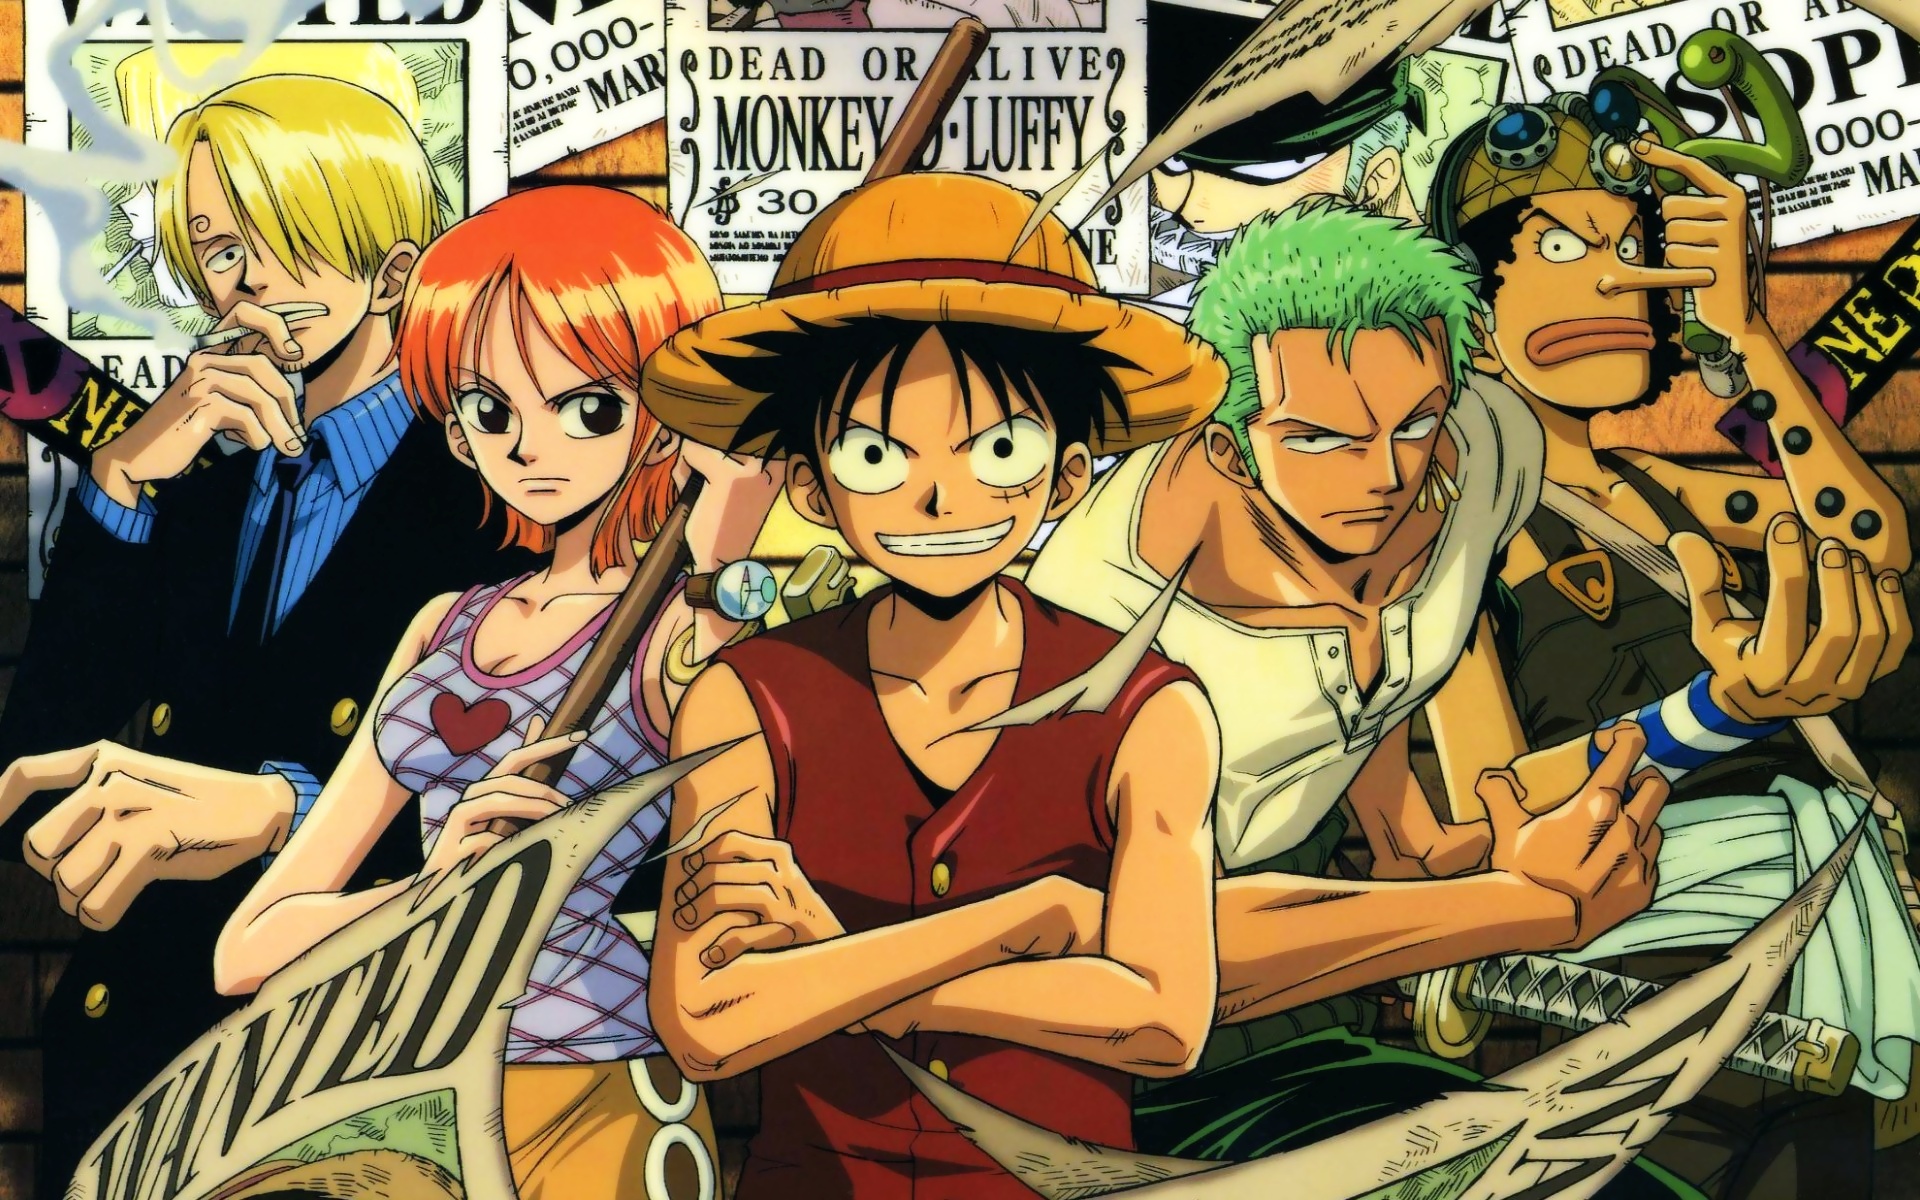 One Piece Pc Wallpapers